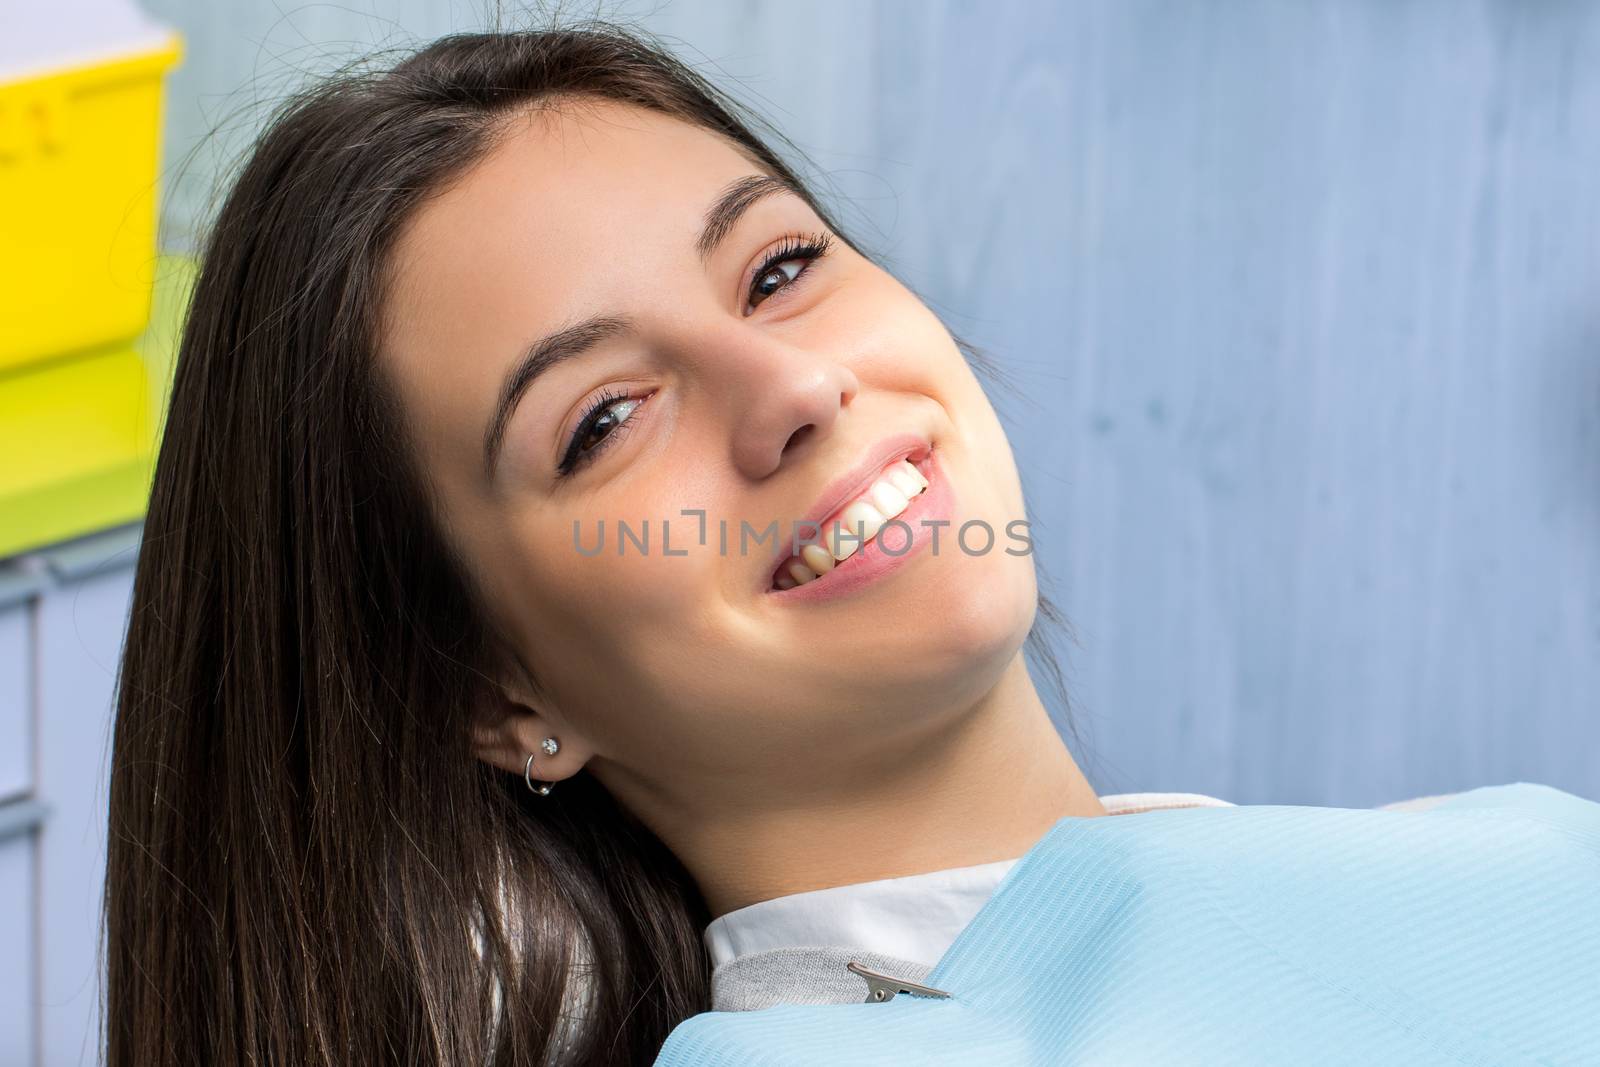 Attractive young woman at dental visit. by karelnoppe